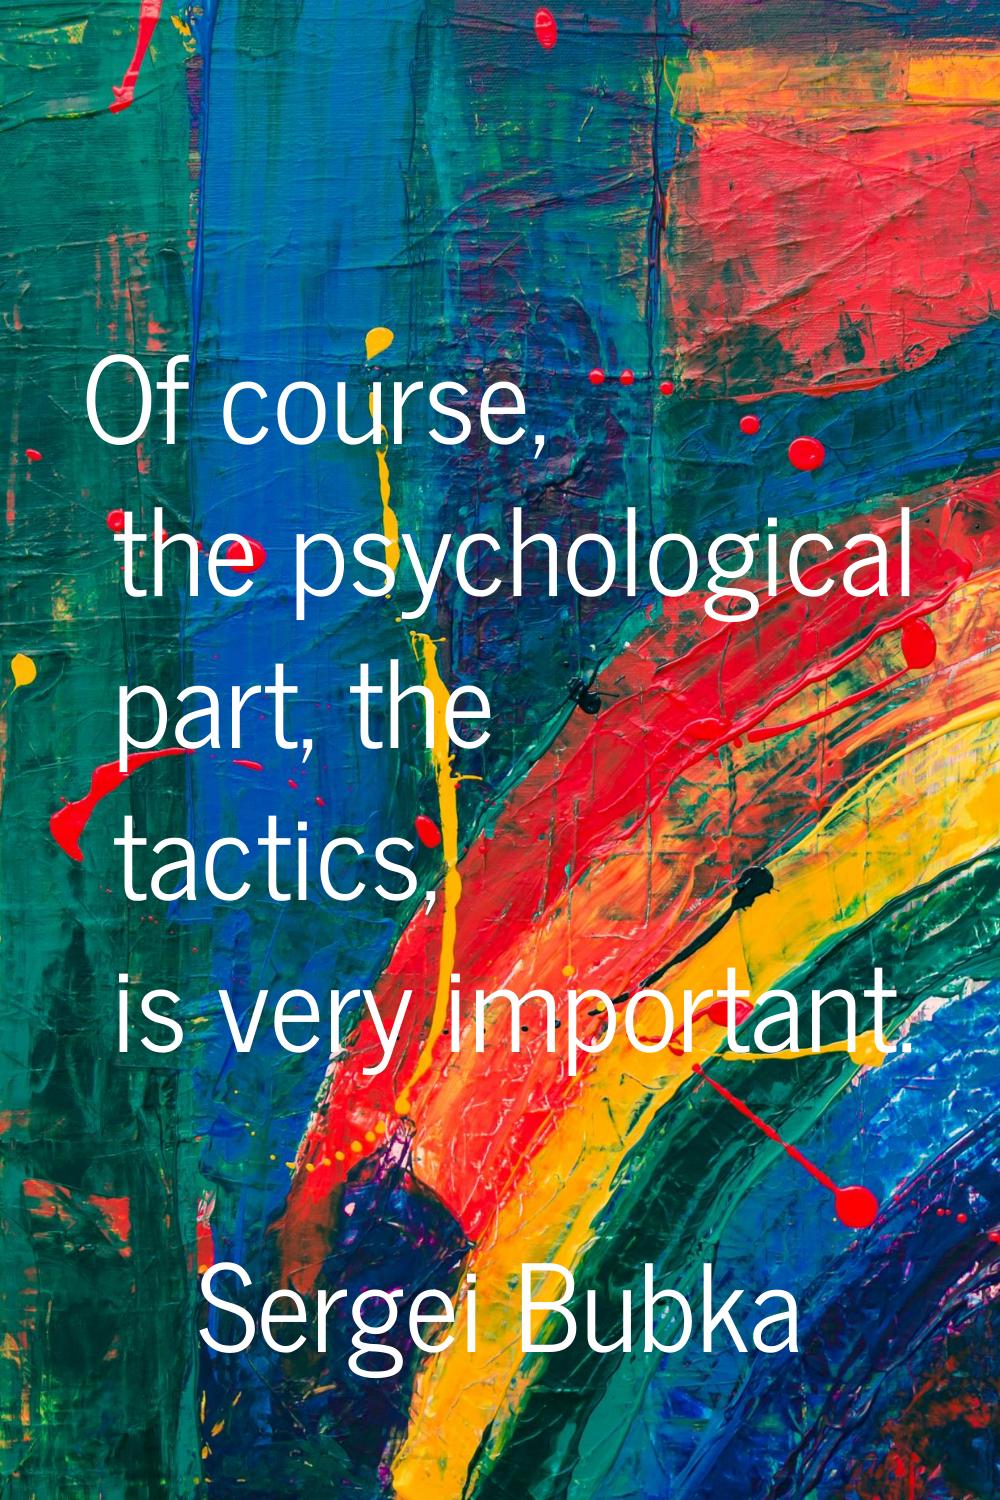 Of course, the psychological part, the tactics, is very important.